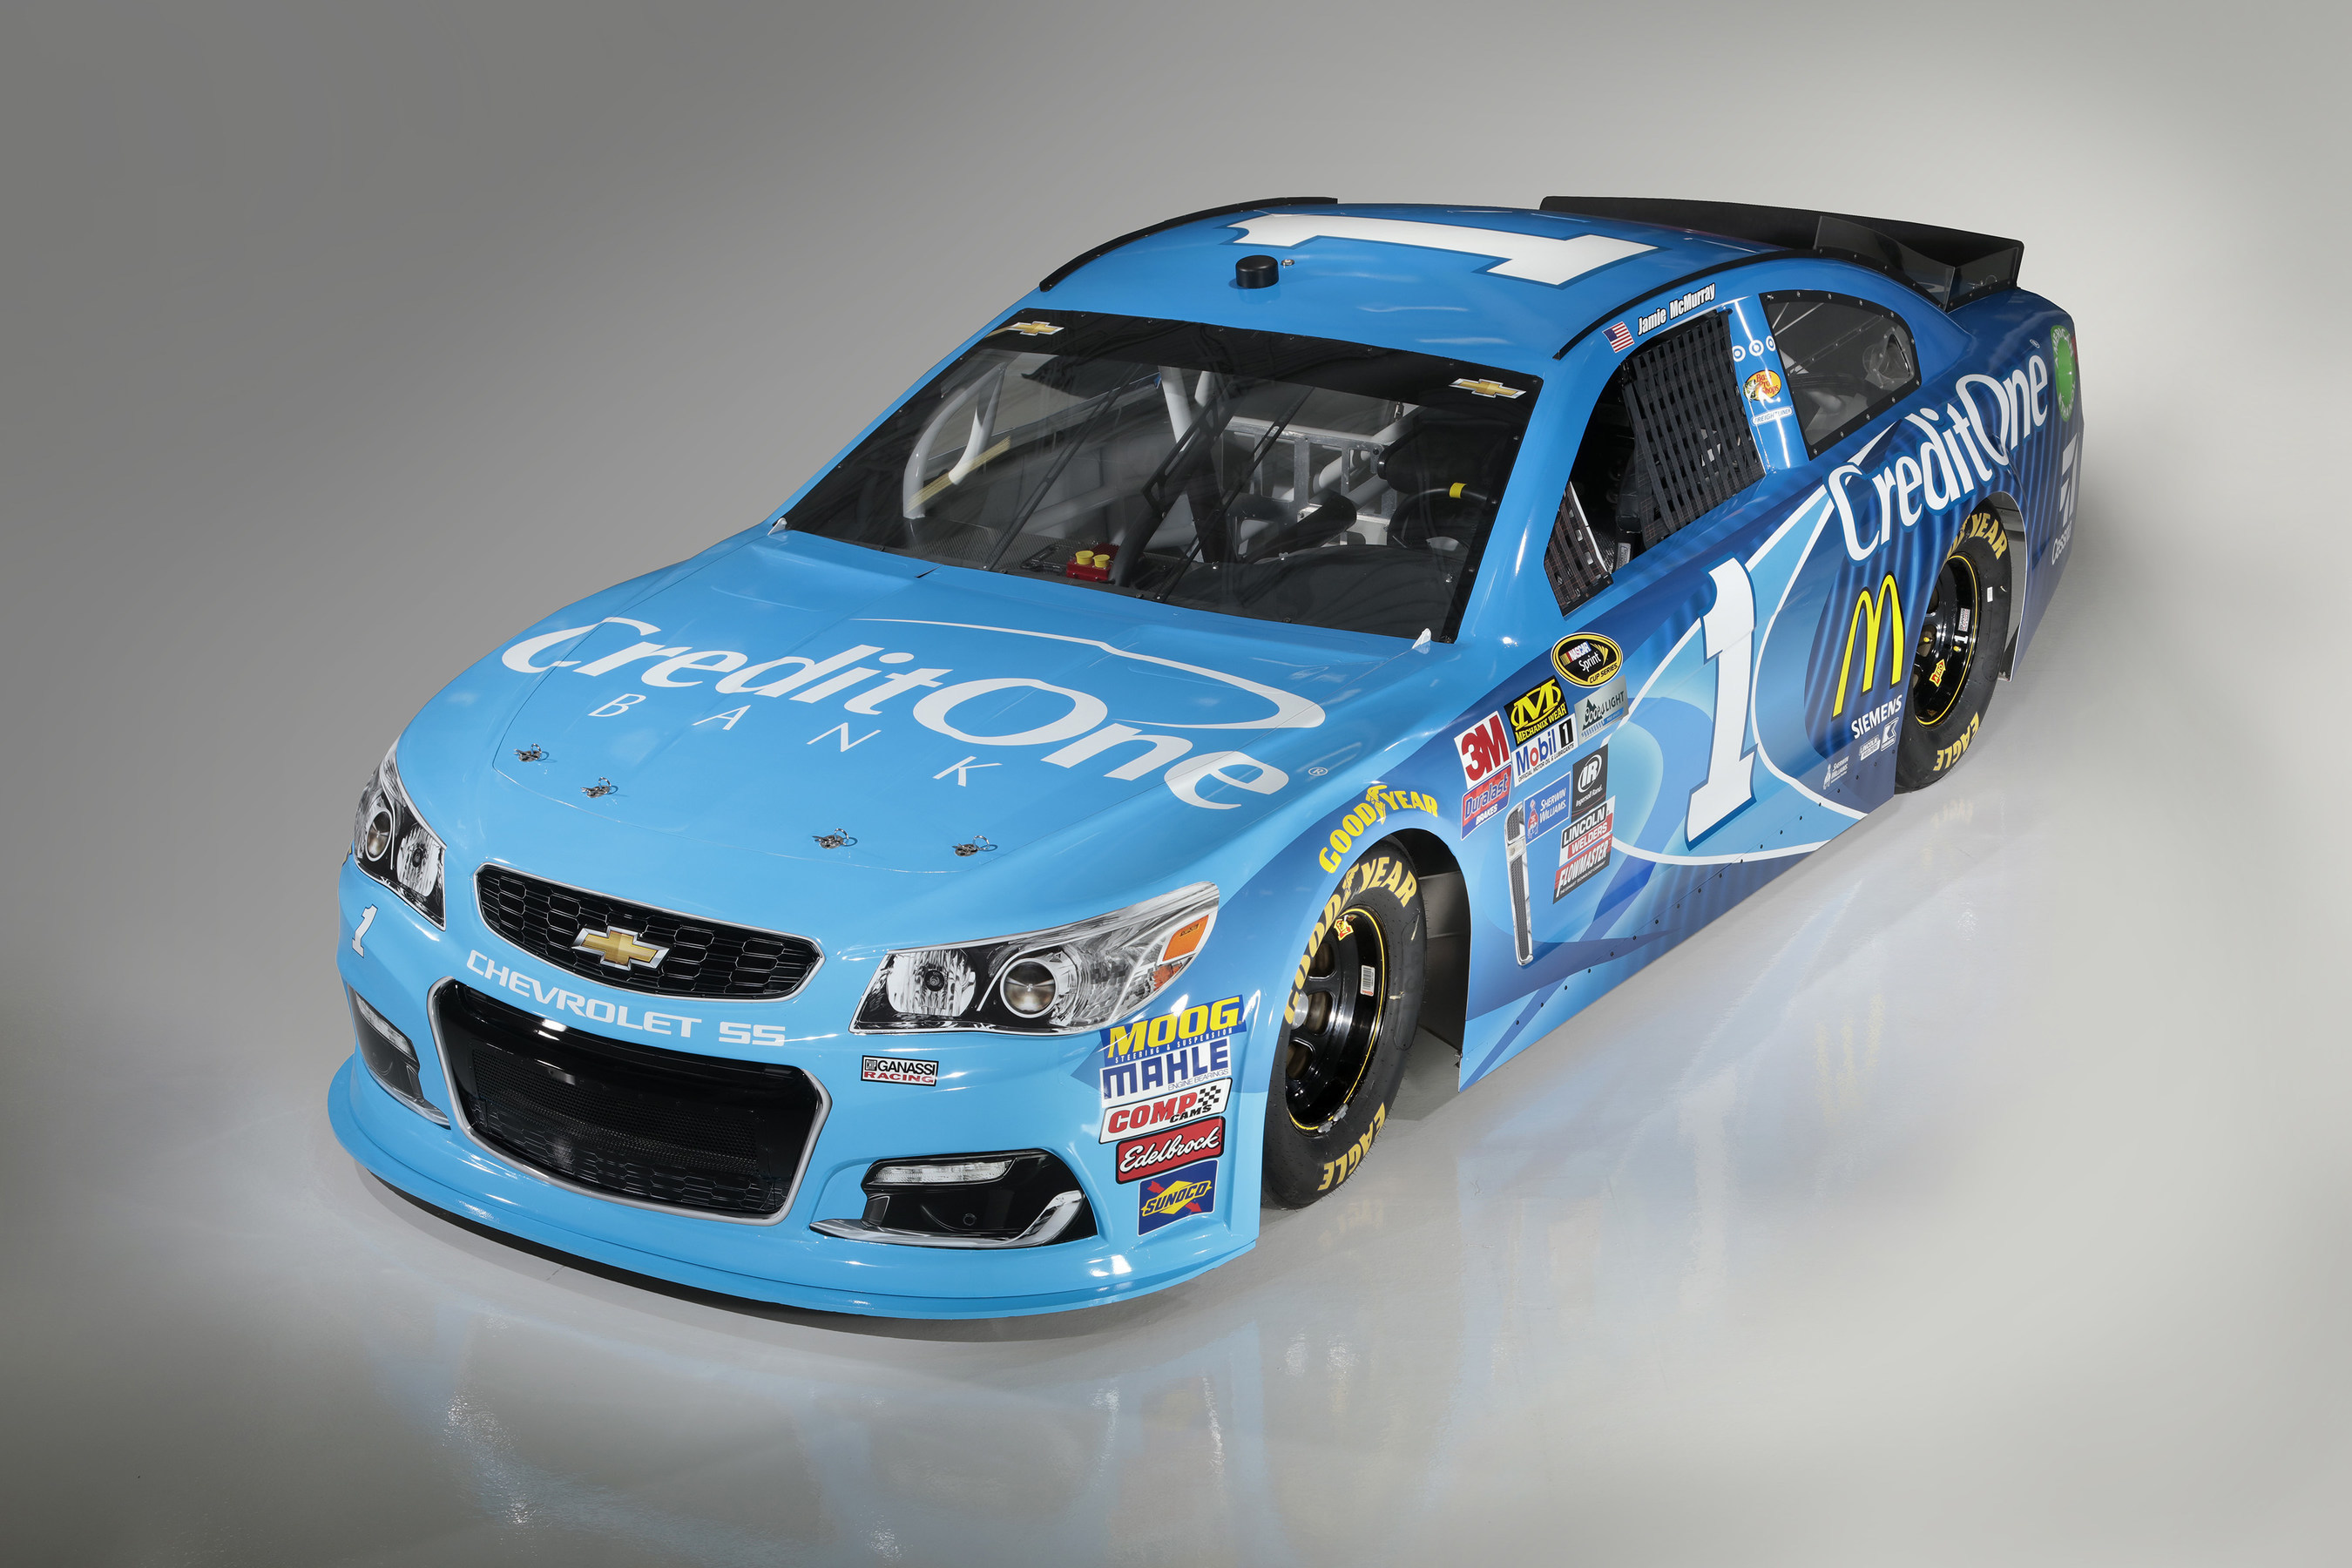 Credit One Bank will make its NASCAR Sprint Cup Series debut as the primary partner on the No. 1 Credit One Bank Chevrolet SS this weekend at Richmond International Raceway.